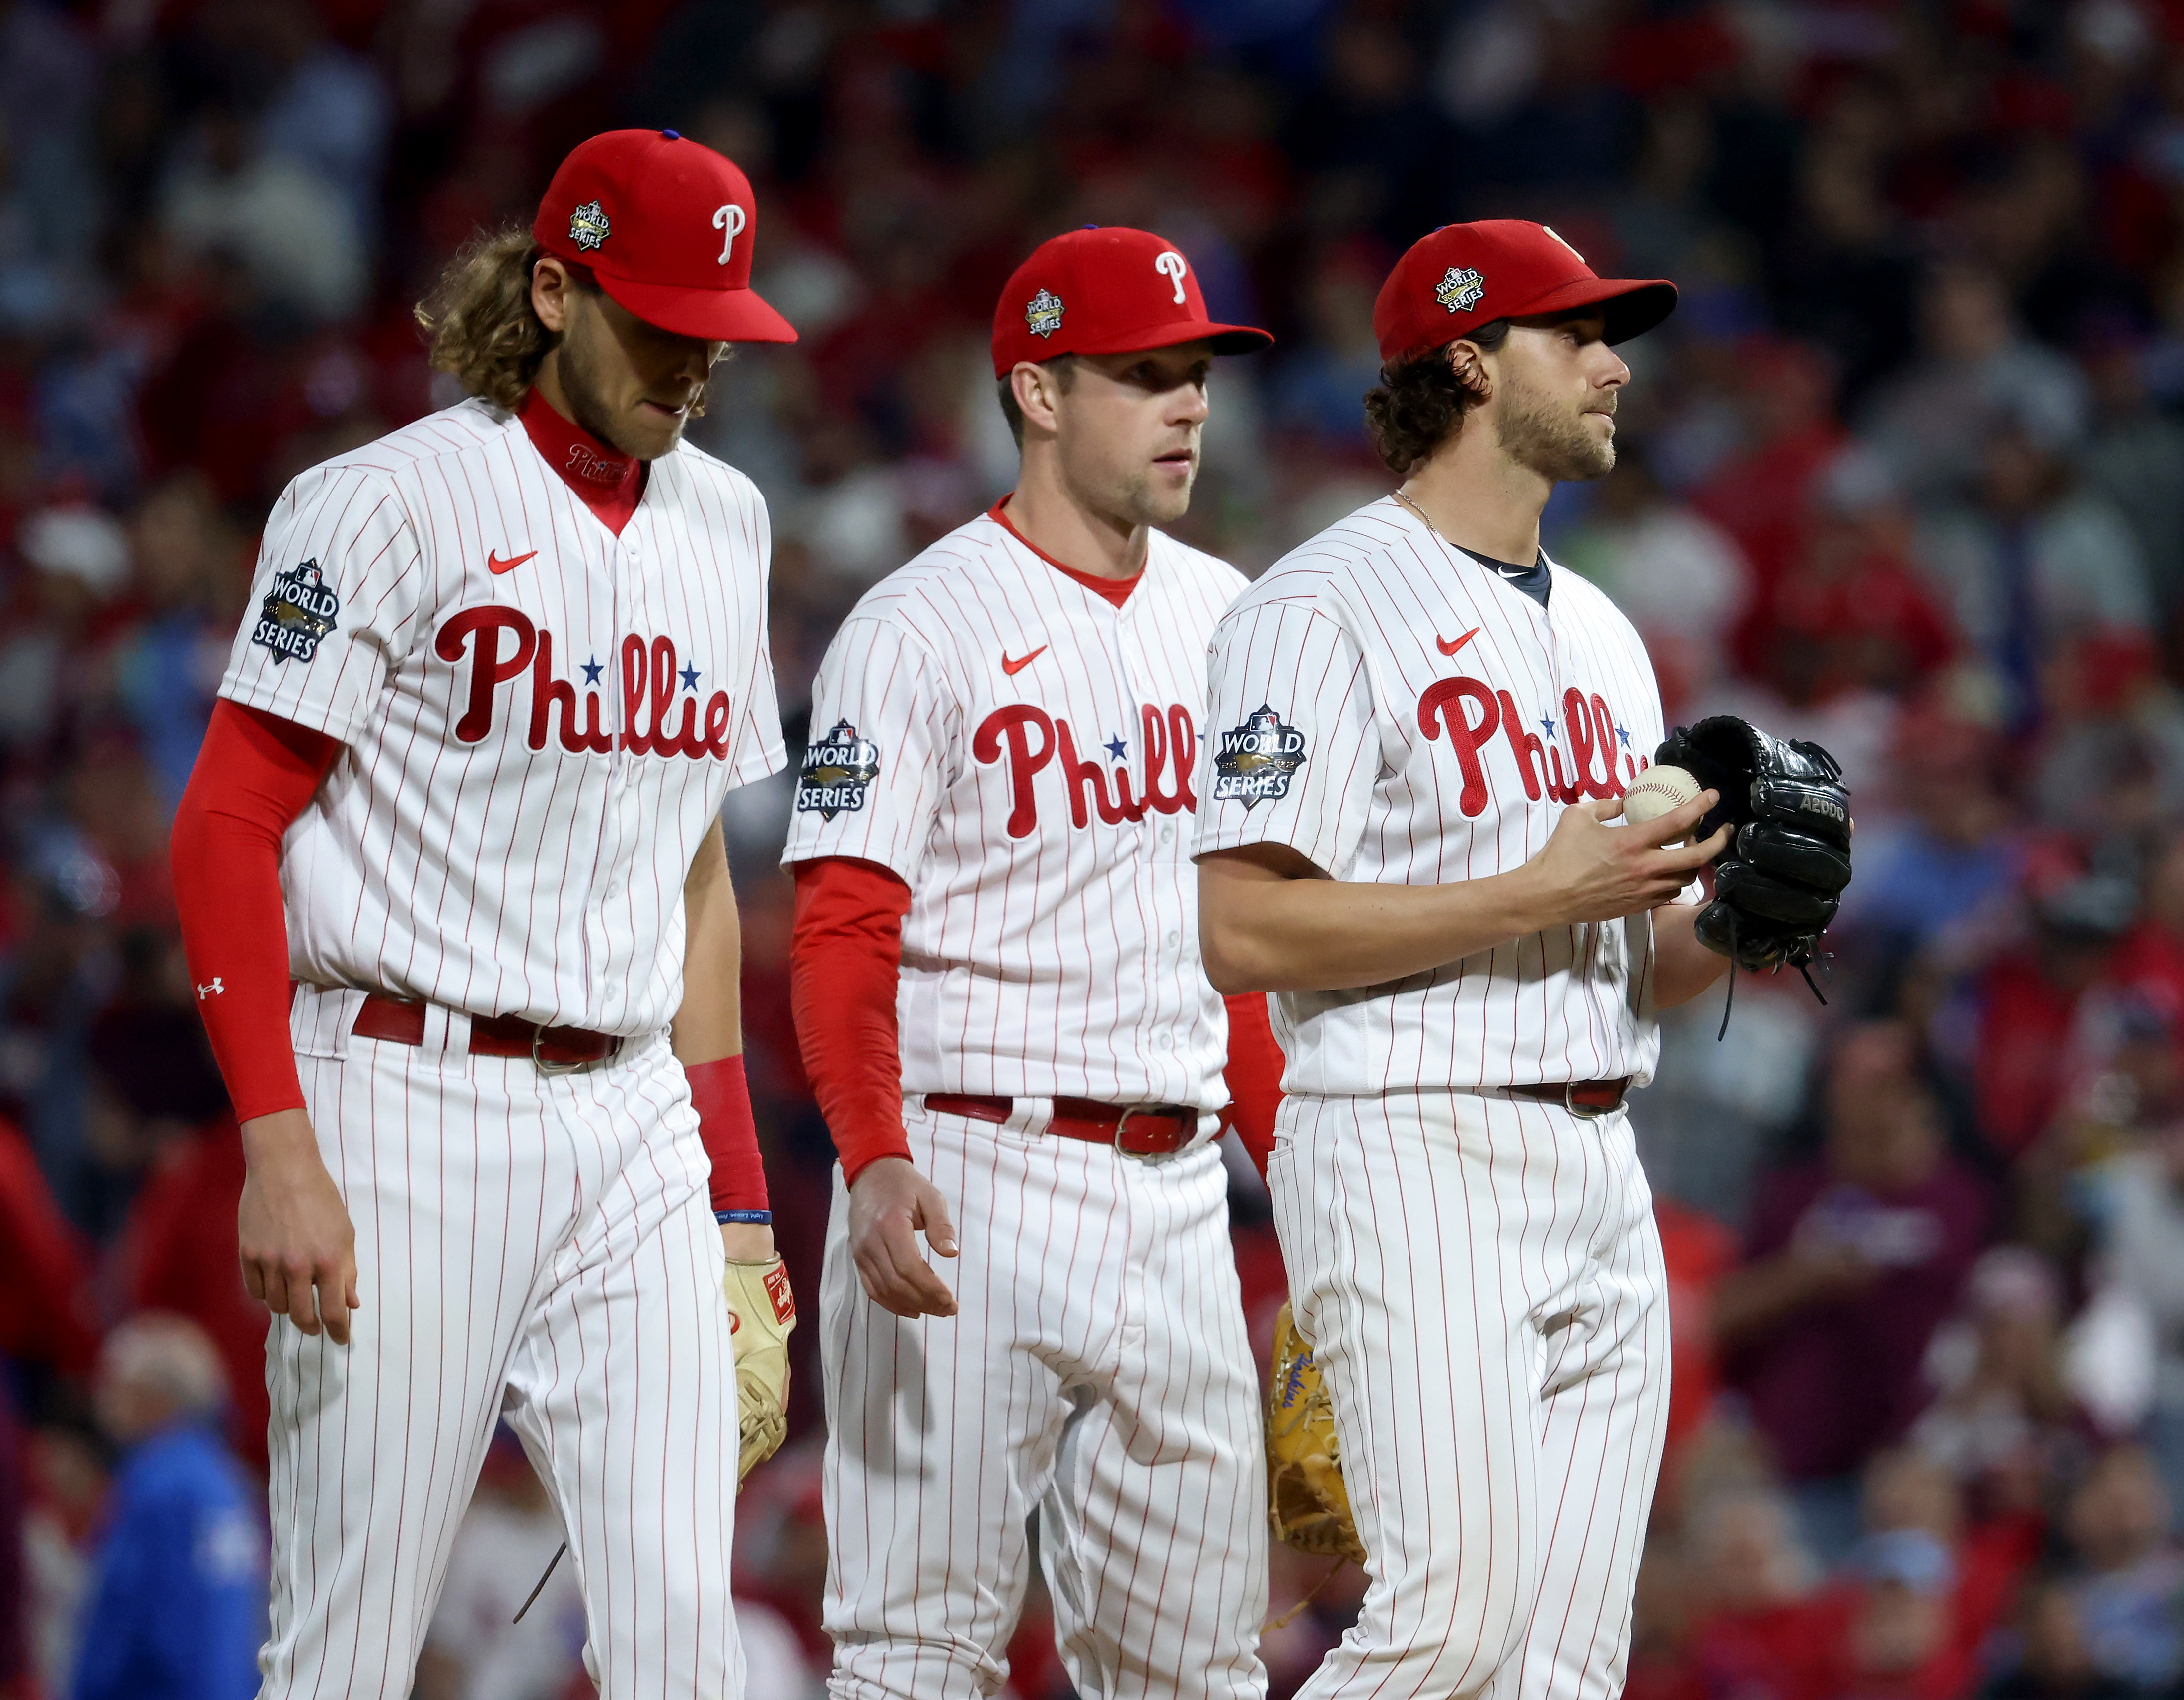 The Yankees will host the Phillies today…at Citizens Bank Park